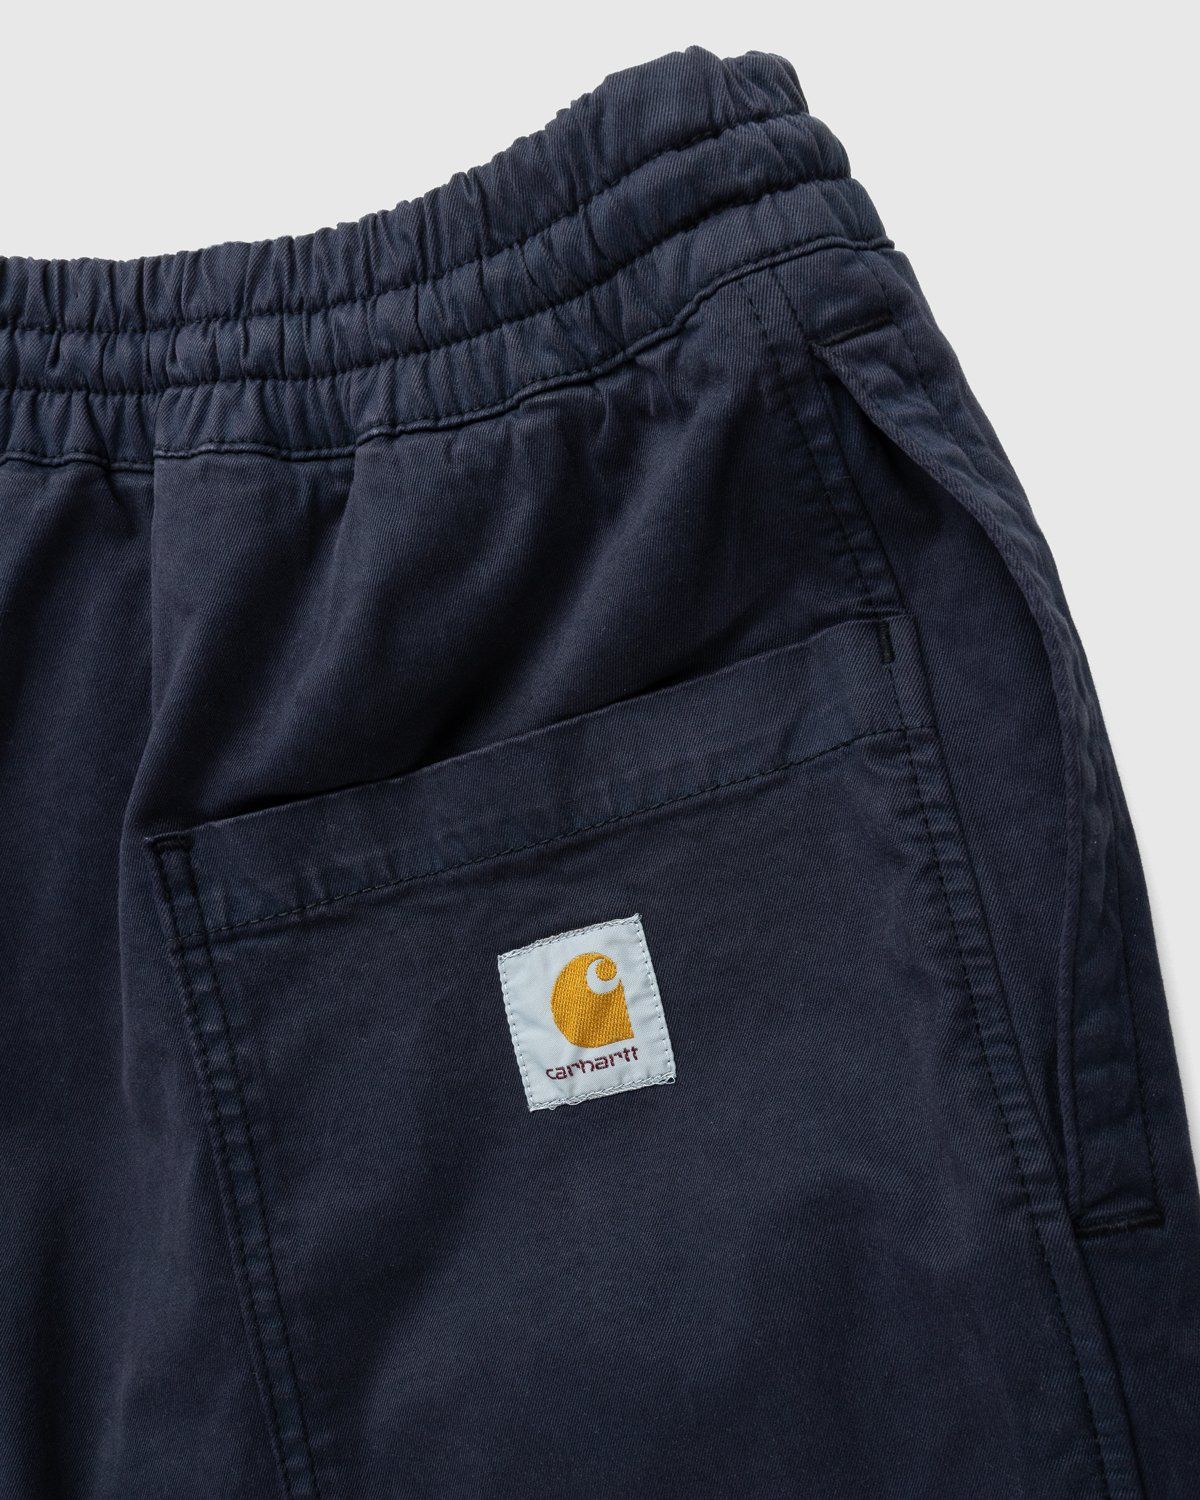 Carhartt WIP – Lawton Pant Navy - Trousers - Blue - Image 4